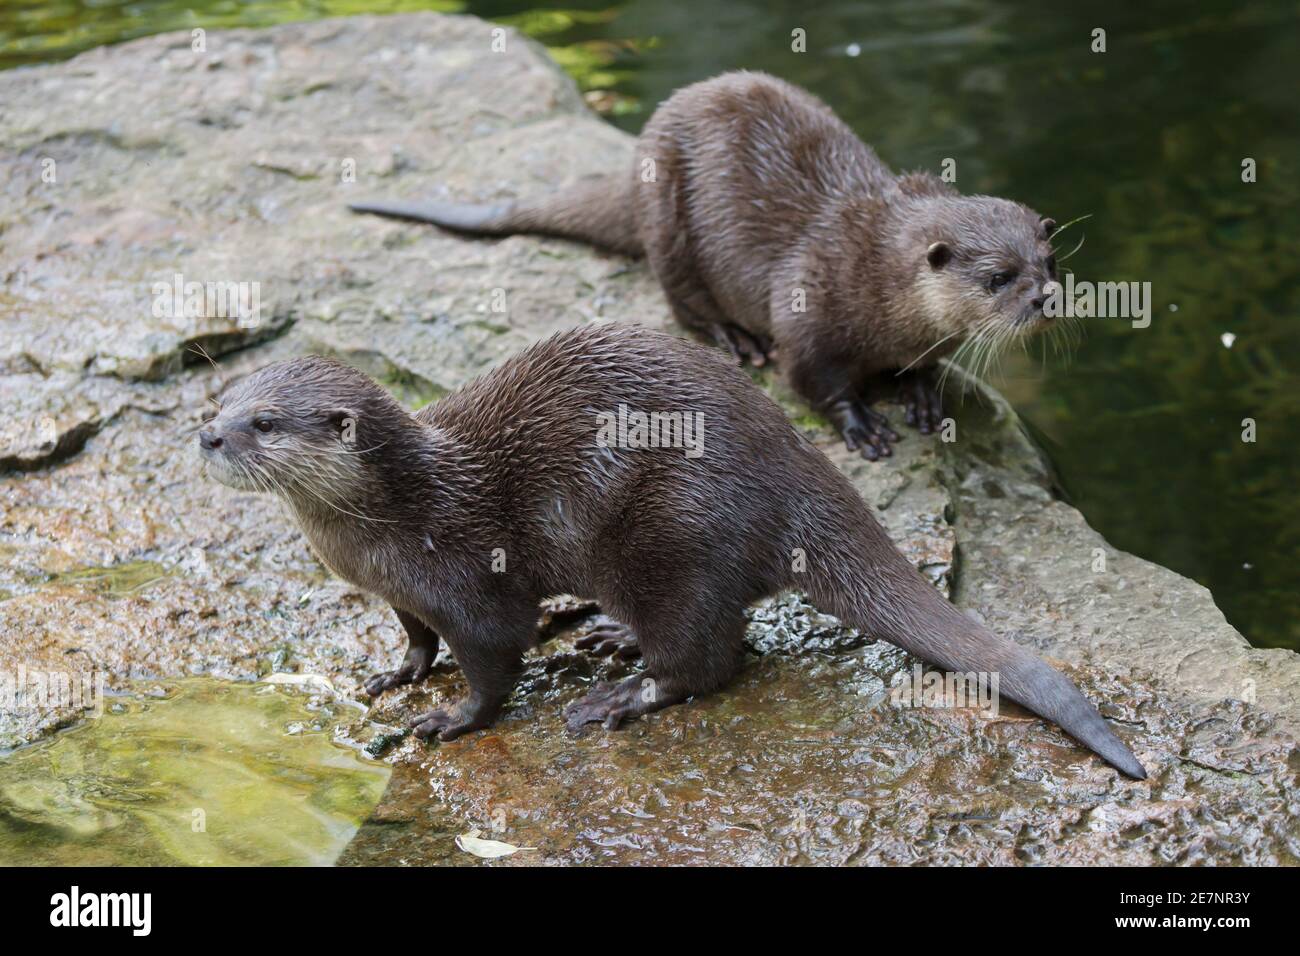 Oriental small-clawed otter (Amblonyx cinereus), also known as the Asian small-clawed otter. Stock Photo